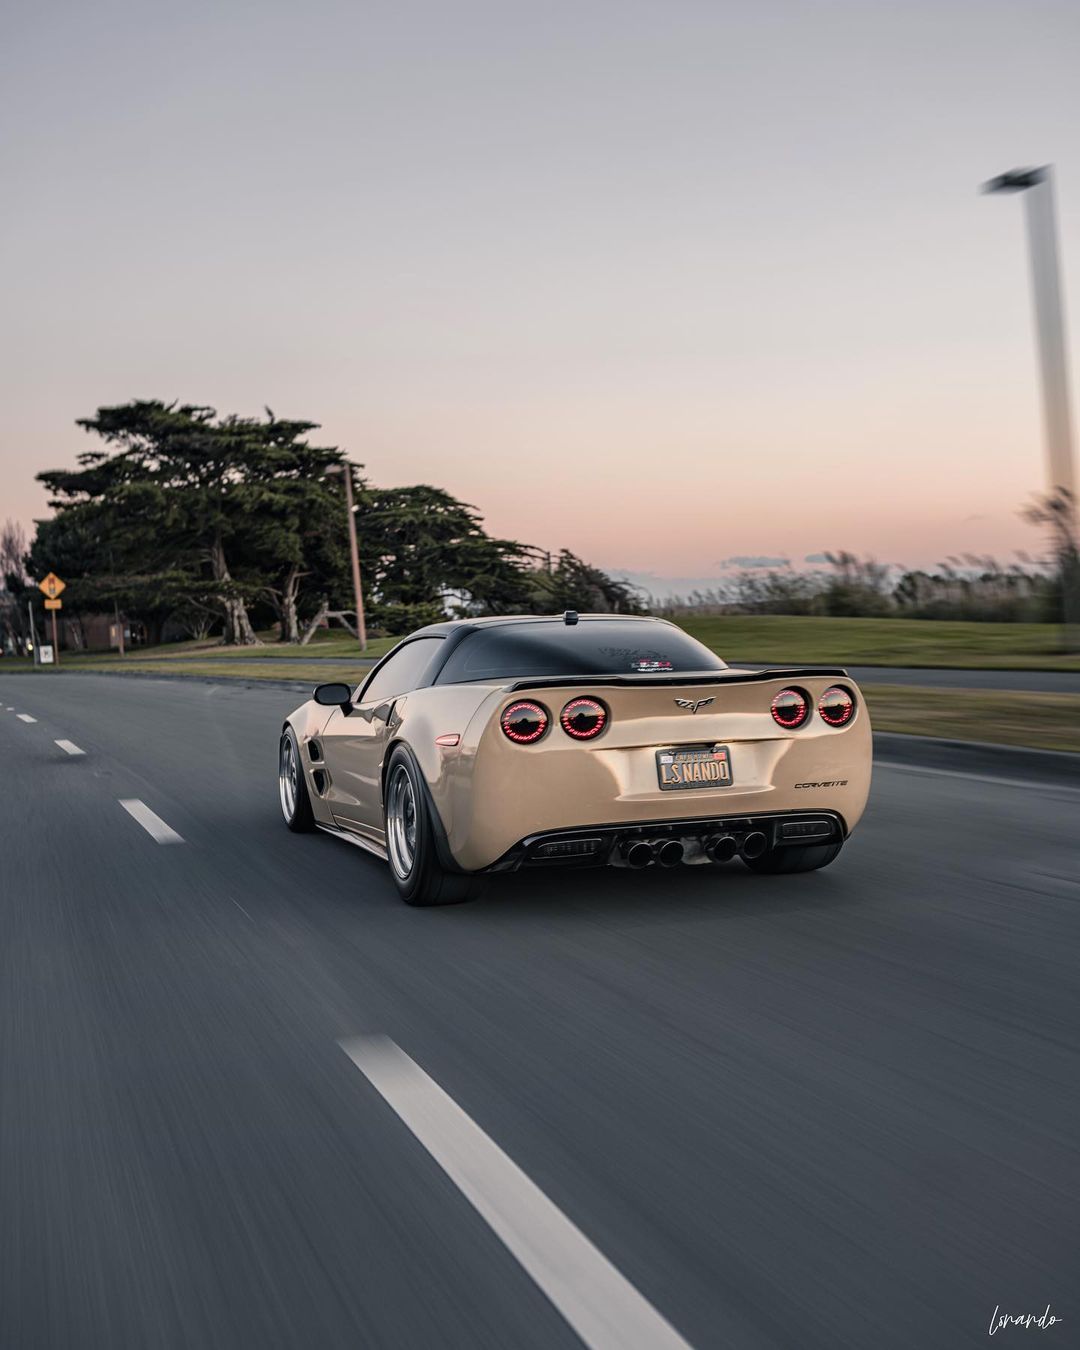 Chevy Corvette C6 with red Eagle Eye LED taillights